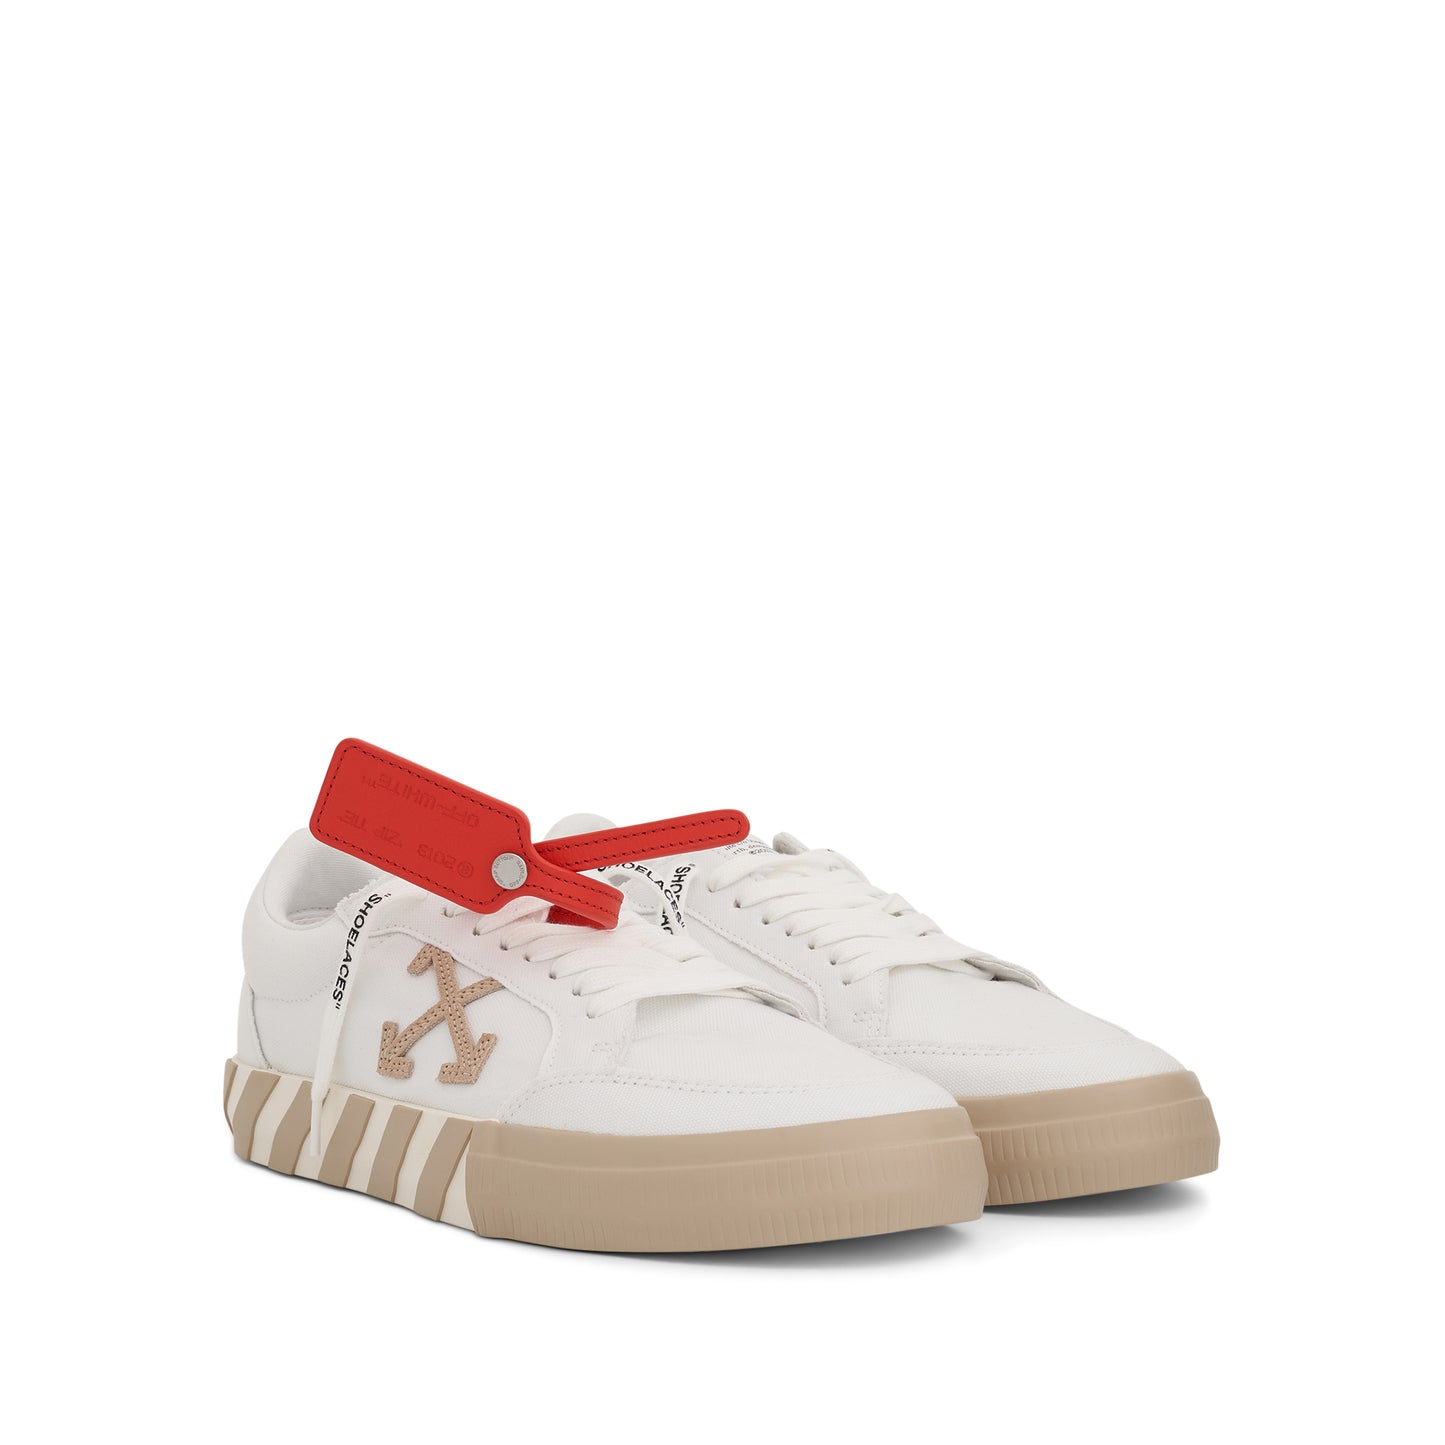 Low Vulcanized Canvas Sneaker in White/Sand